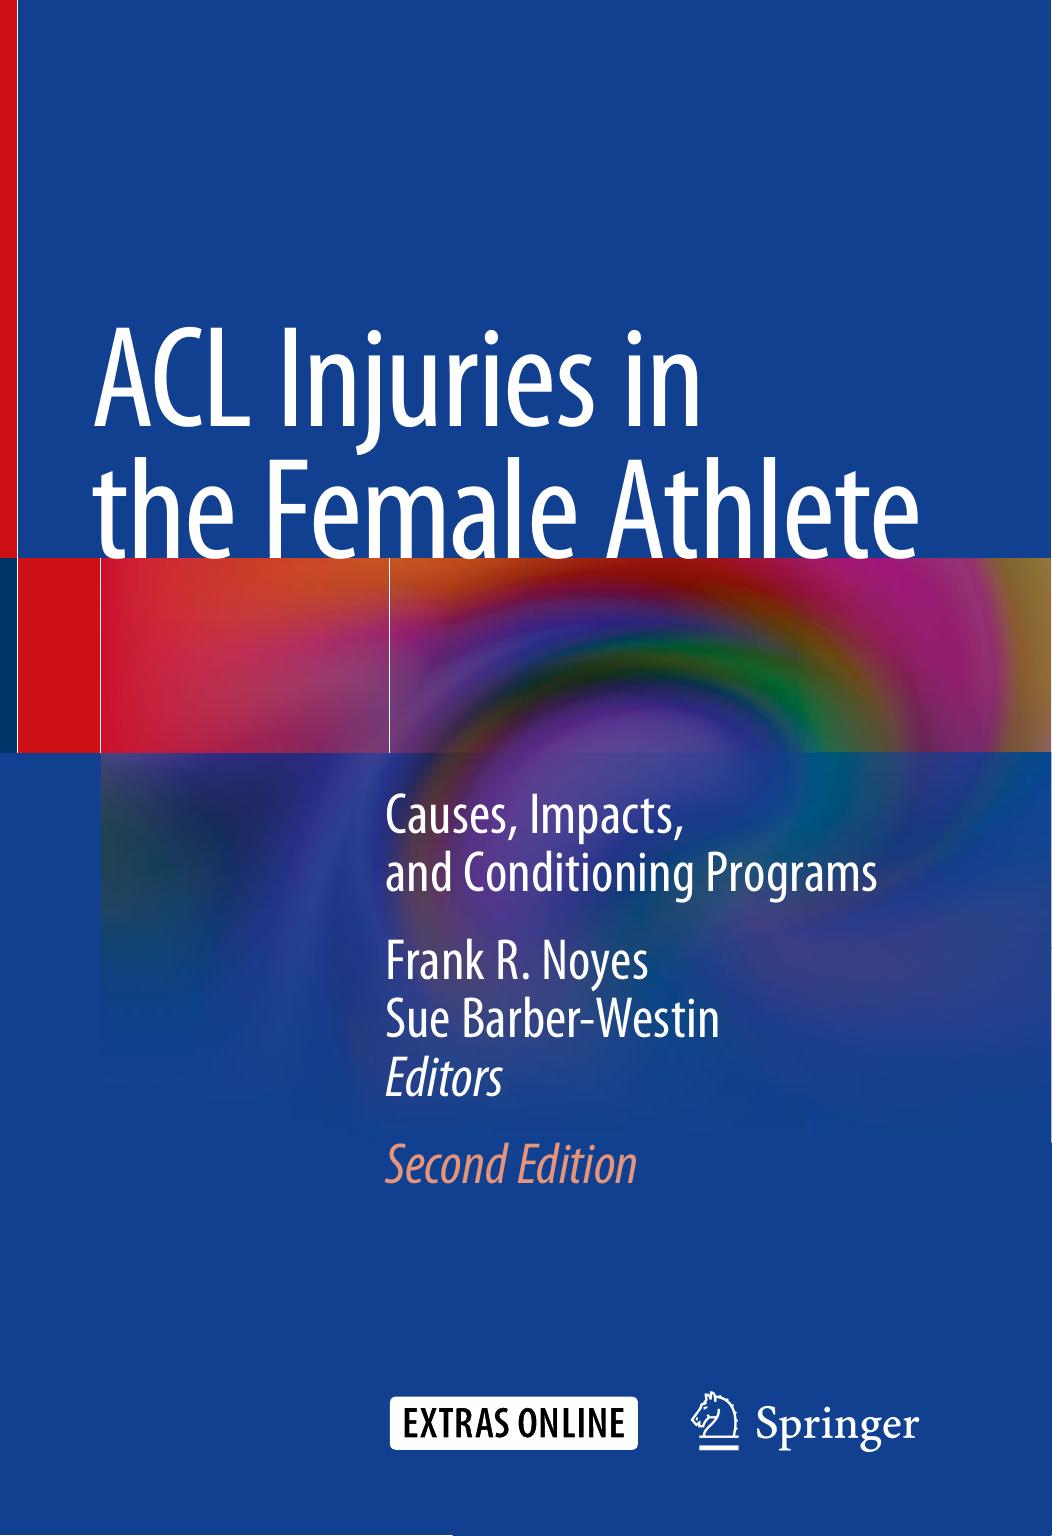 ACL Injuries in the Female Athlete- Causes, Impacts, and Conditioning Programs 2018